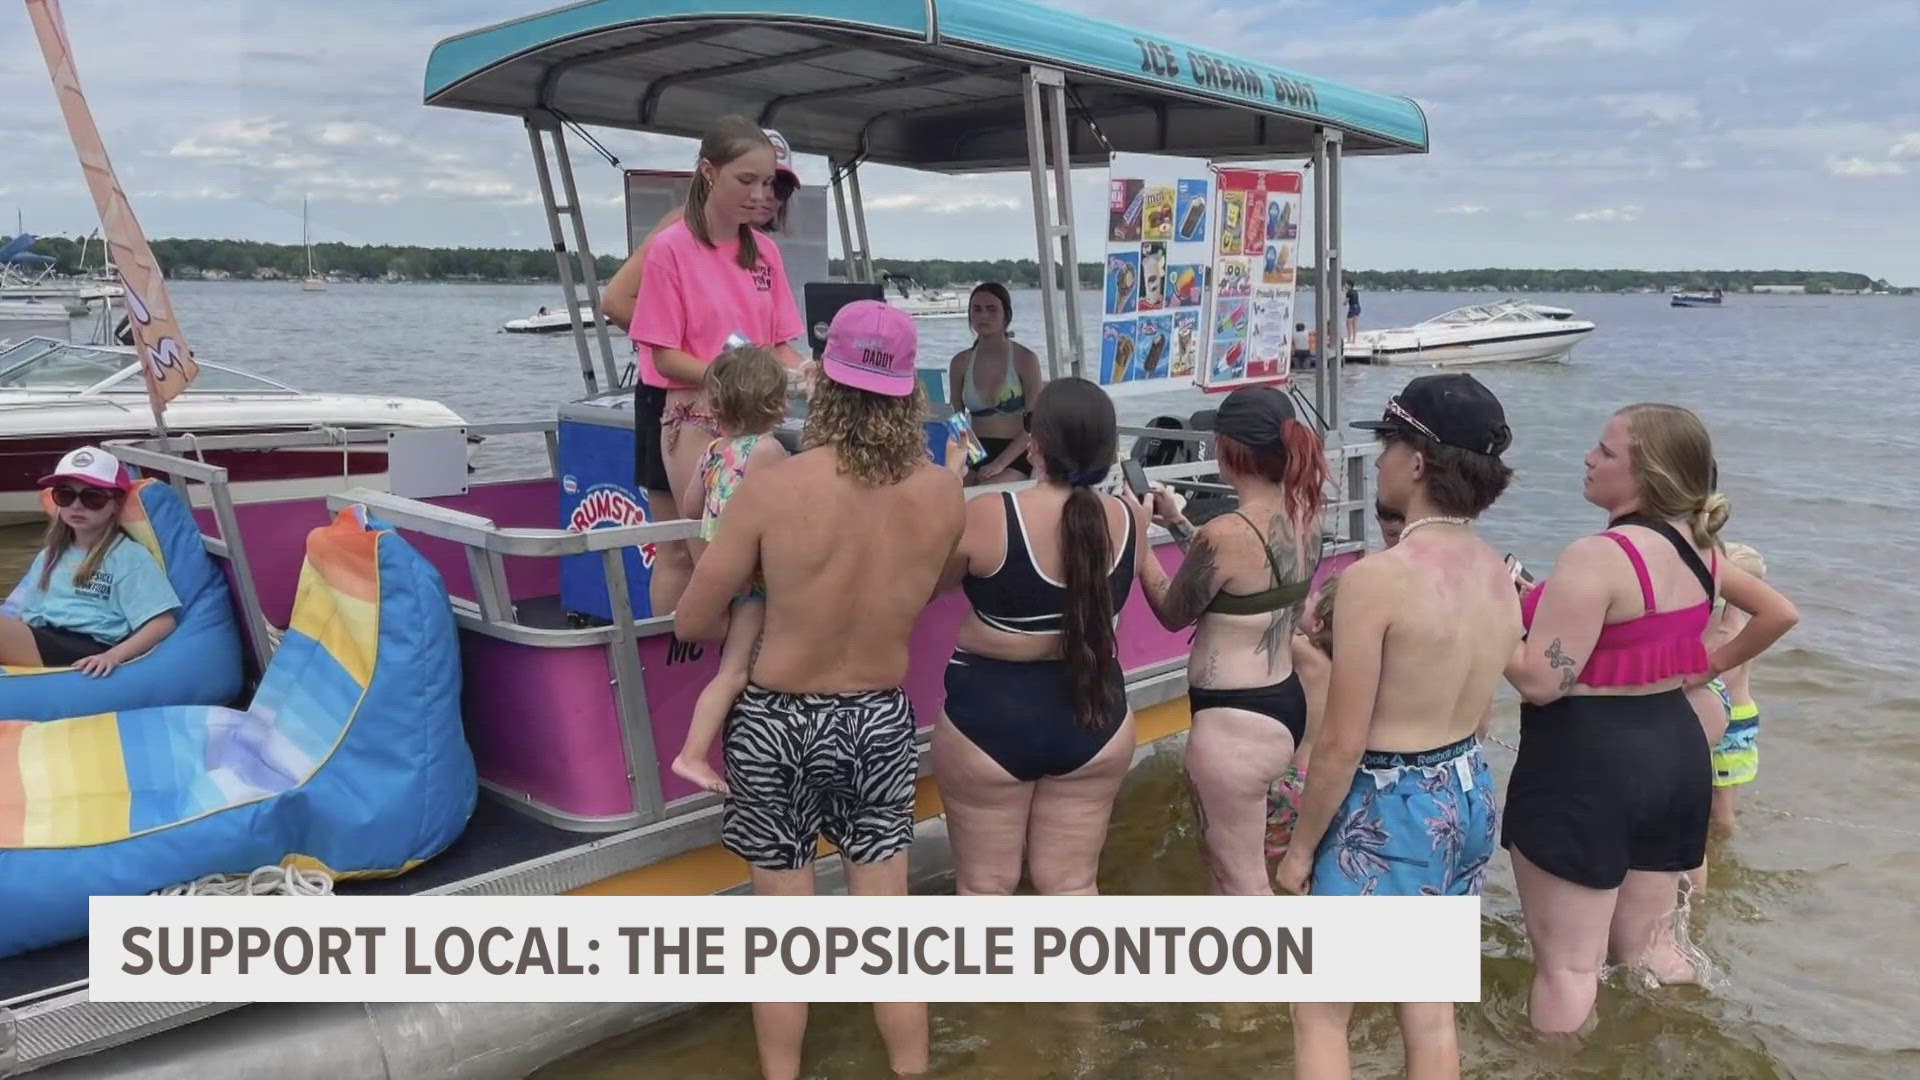 The Popsicle Pontoon is an ice cream boat owned and operated by the Coffey family